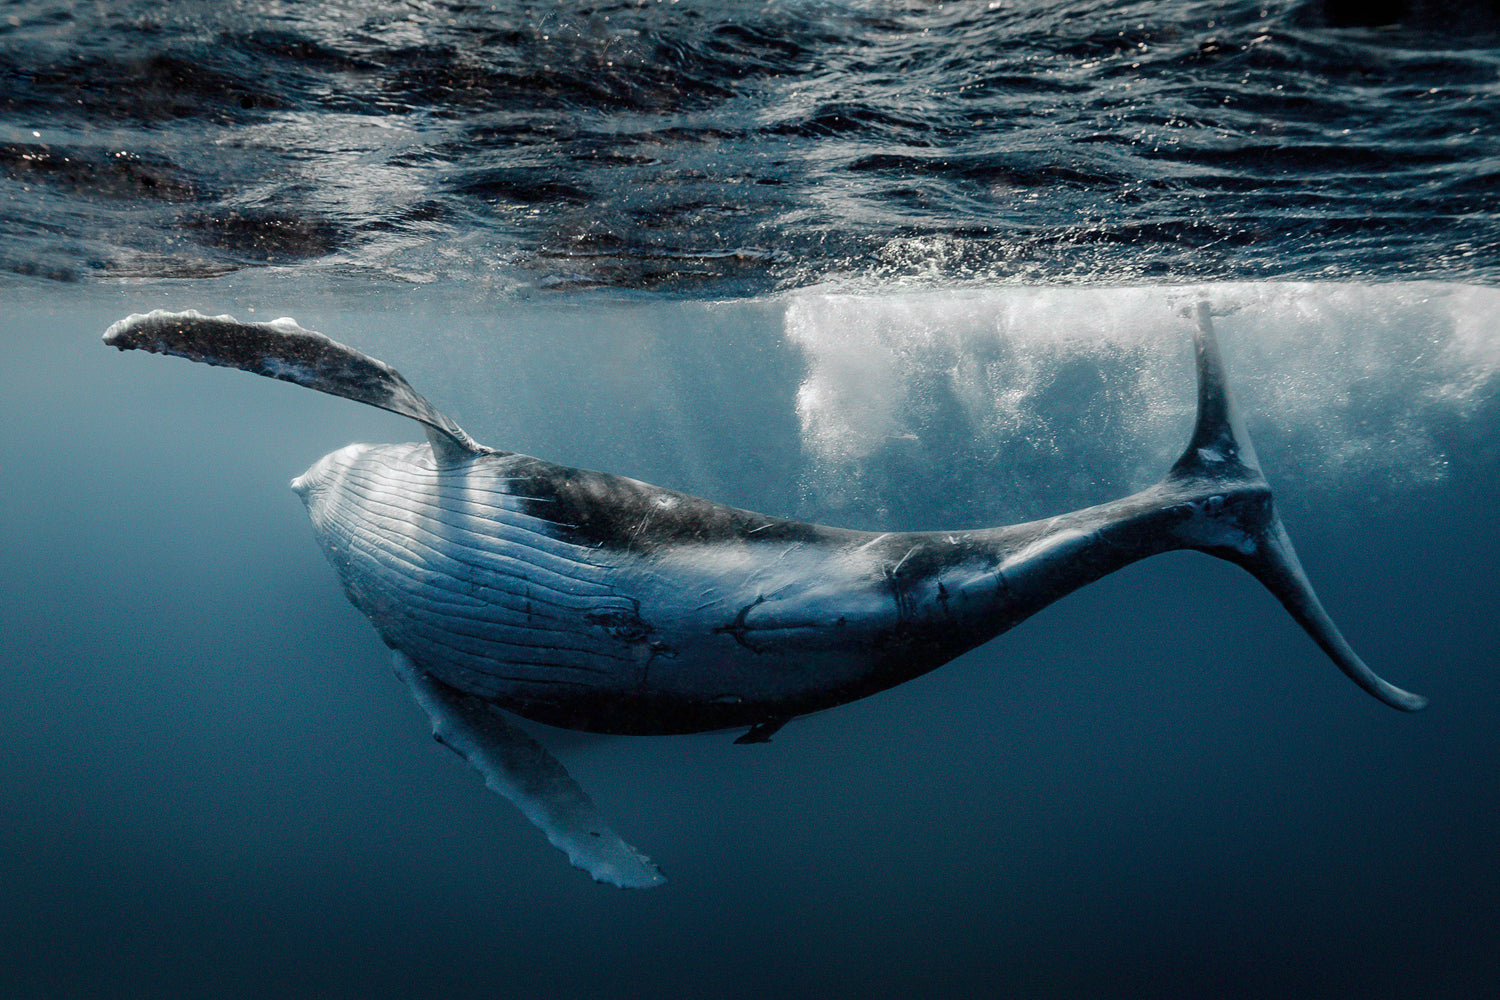 the underbelly of a large grey humpback whale as she flips through the water